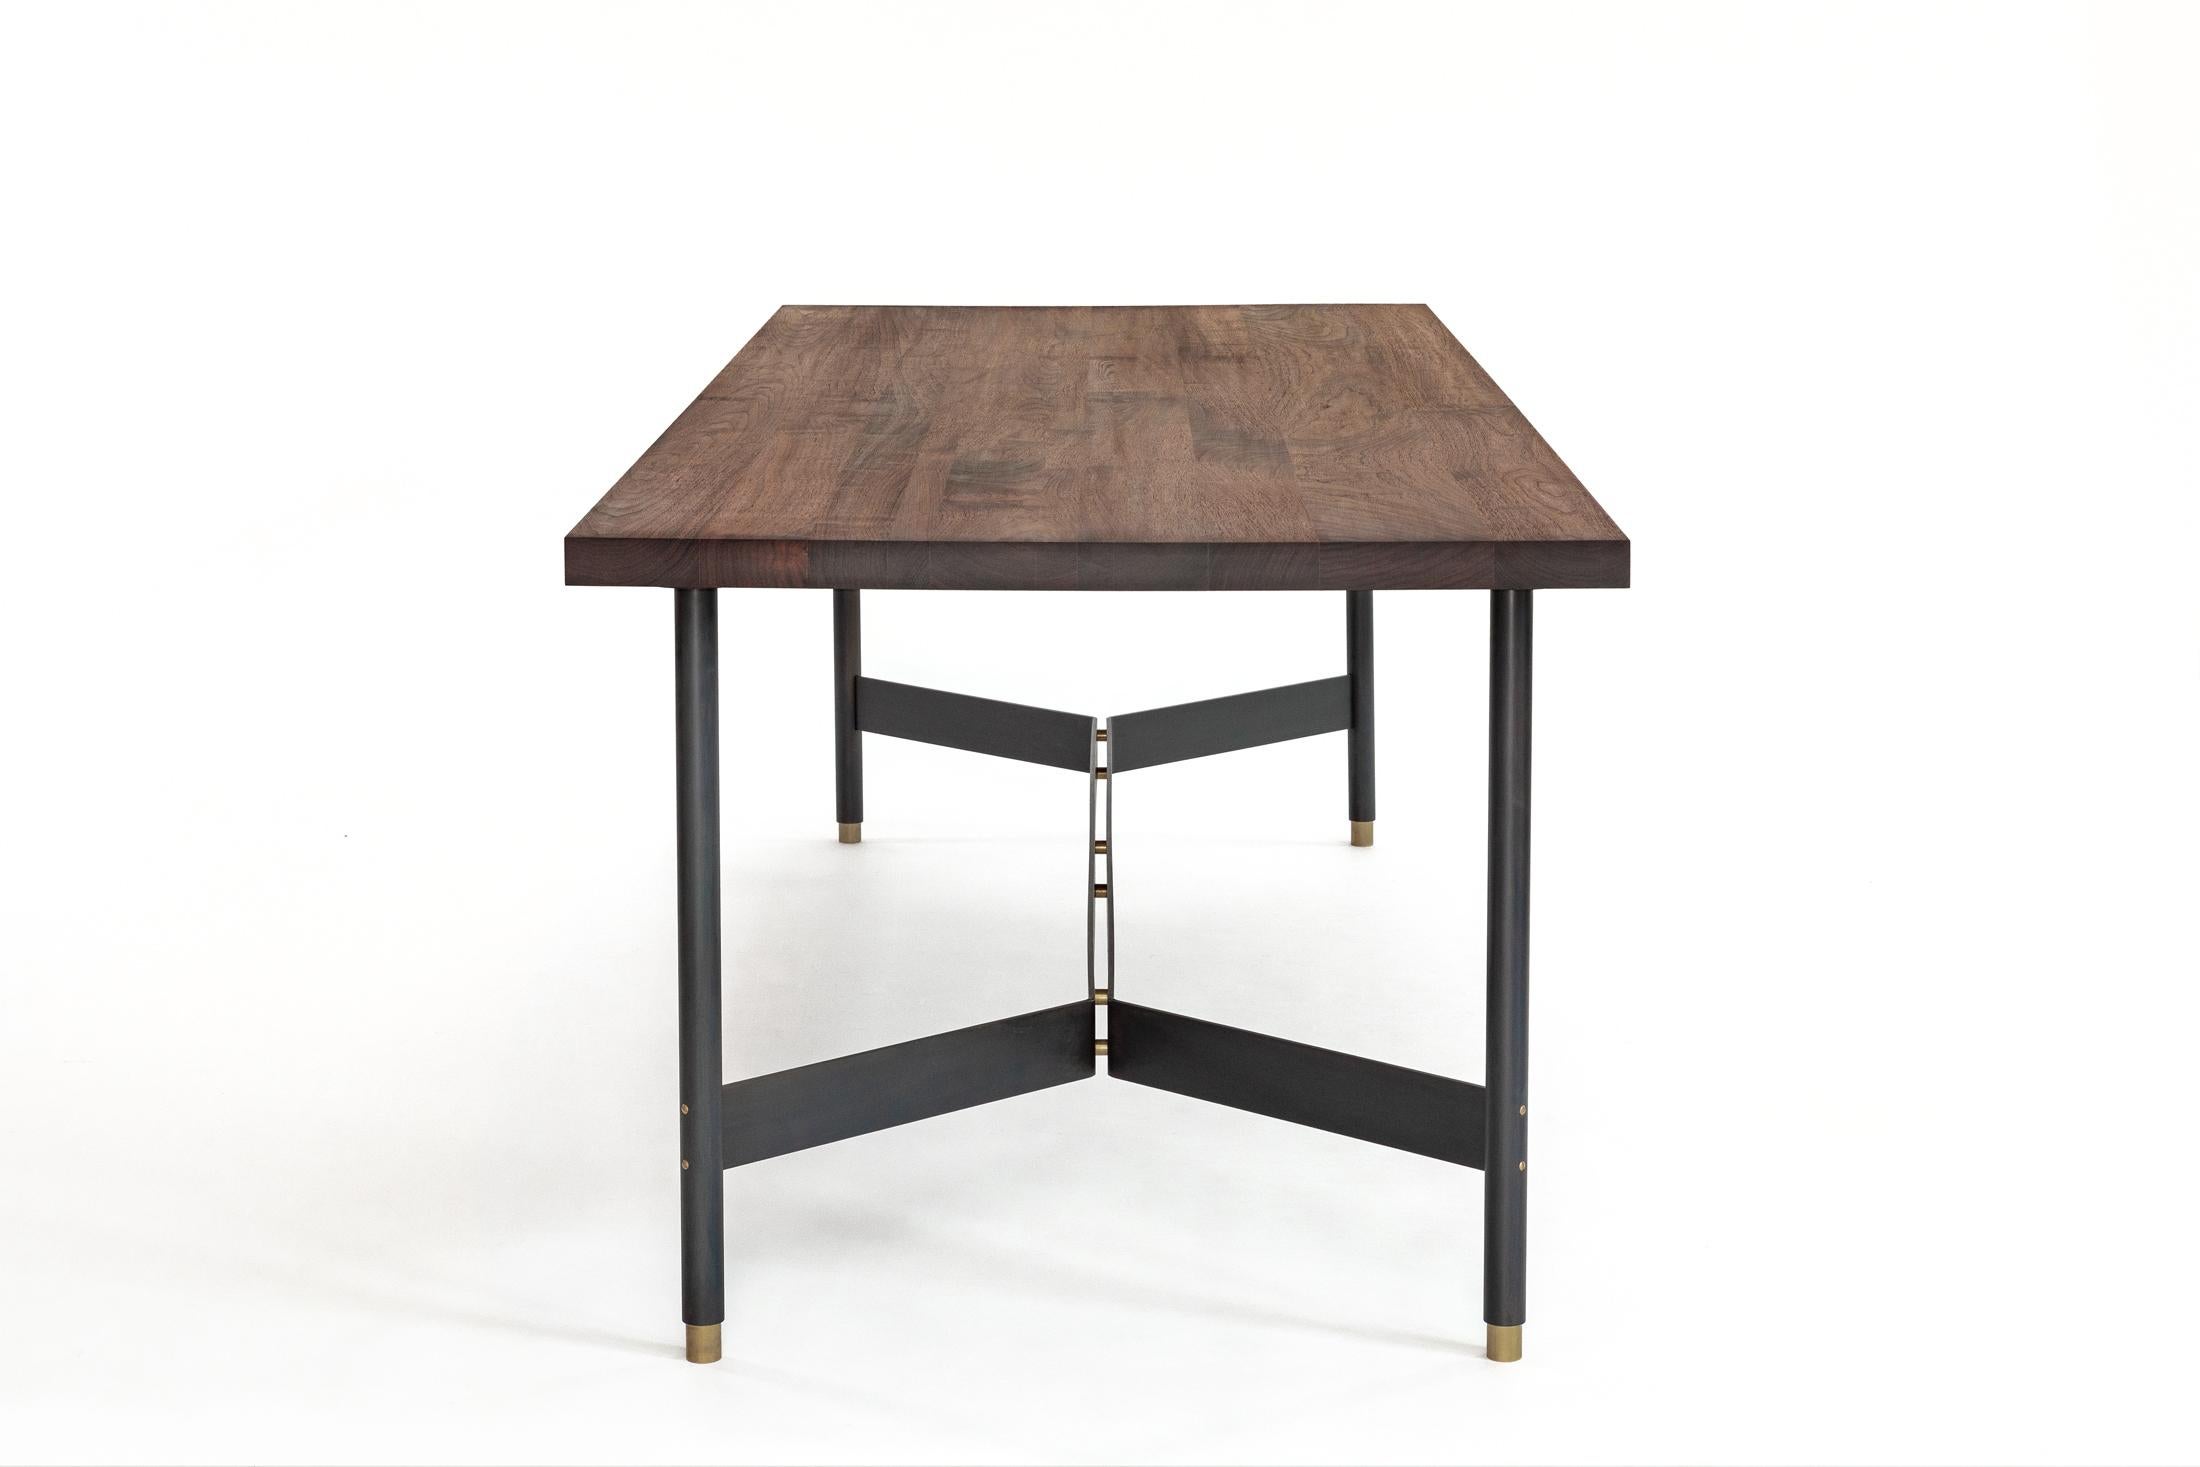 Hand-Crafted AT11, Solid Walnut & Blackened Steel Dining Table, Work Table, Desk For Sale